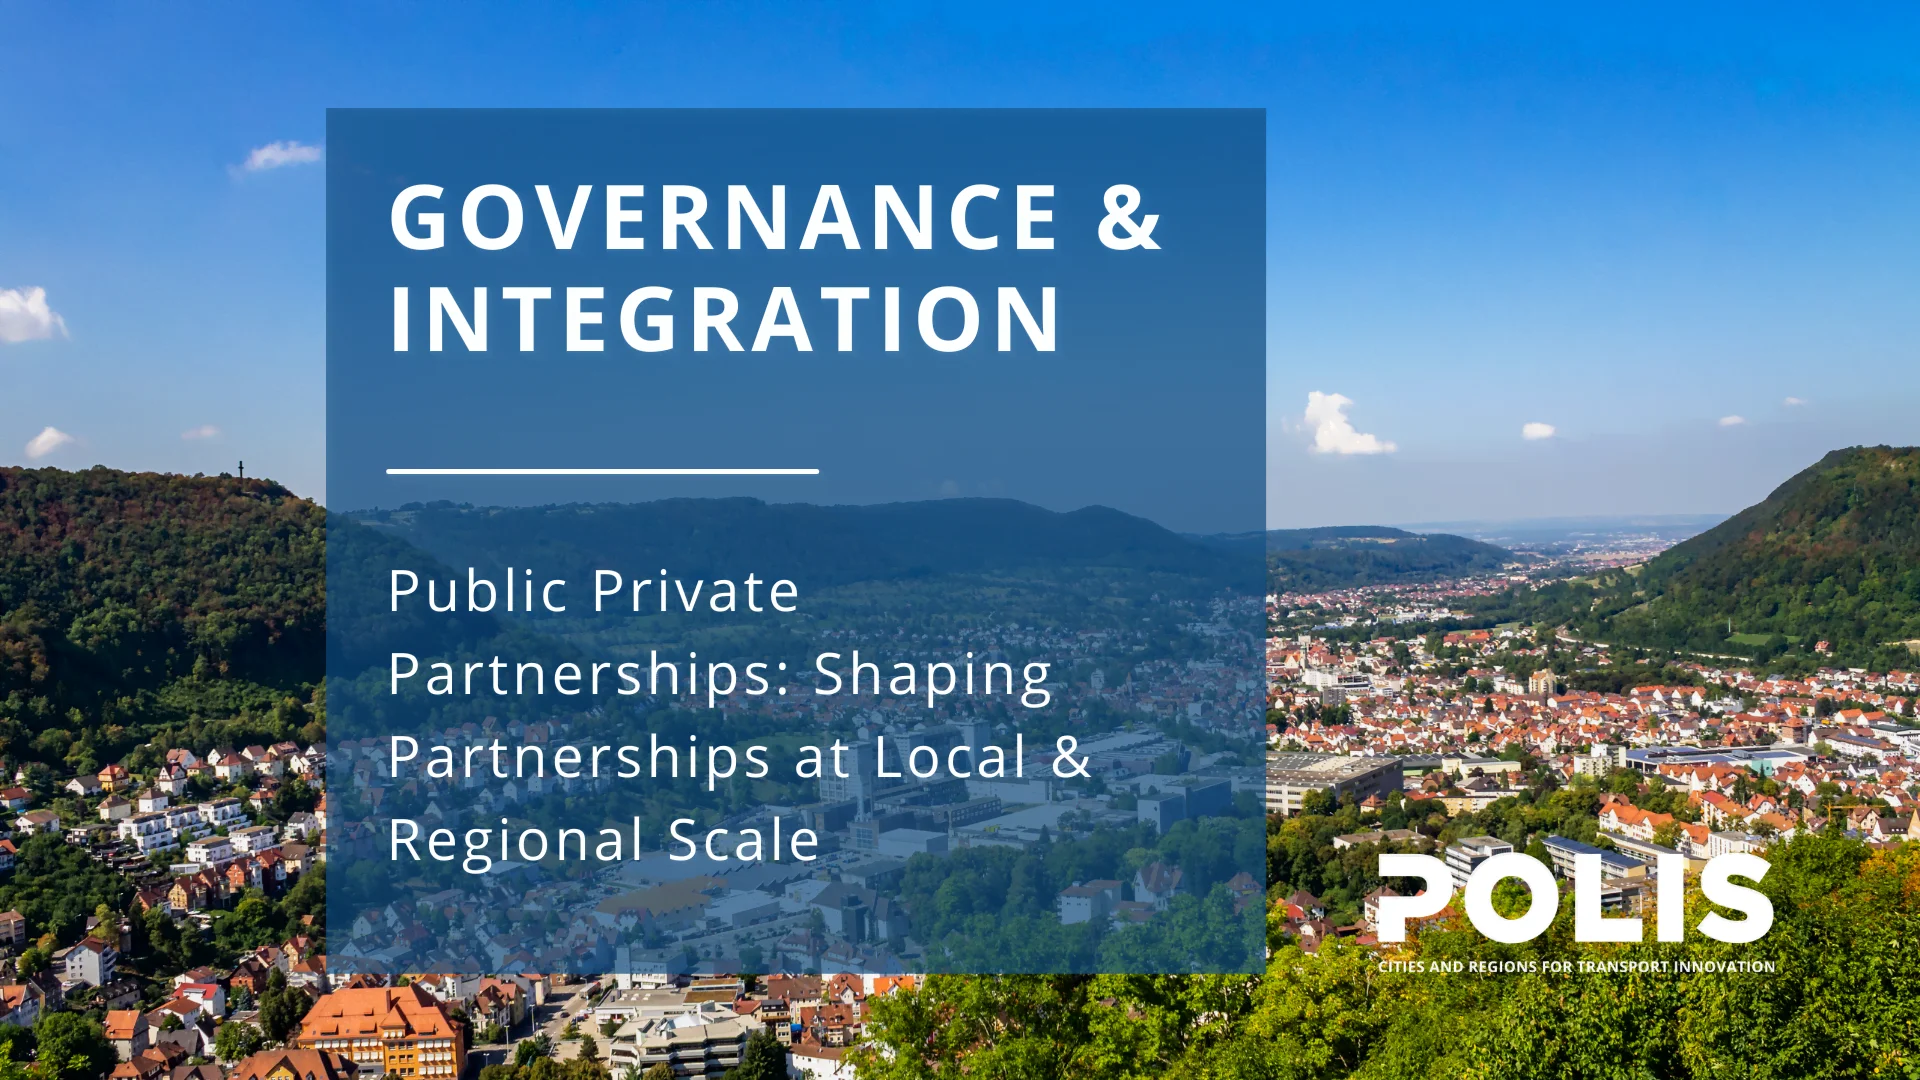 Public Private Partnerships: Local & Regional Scales